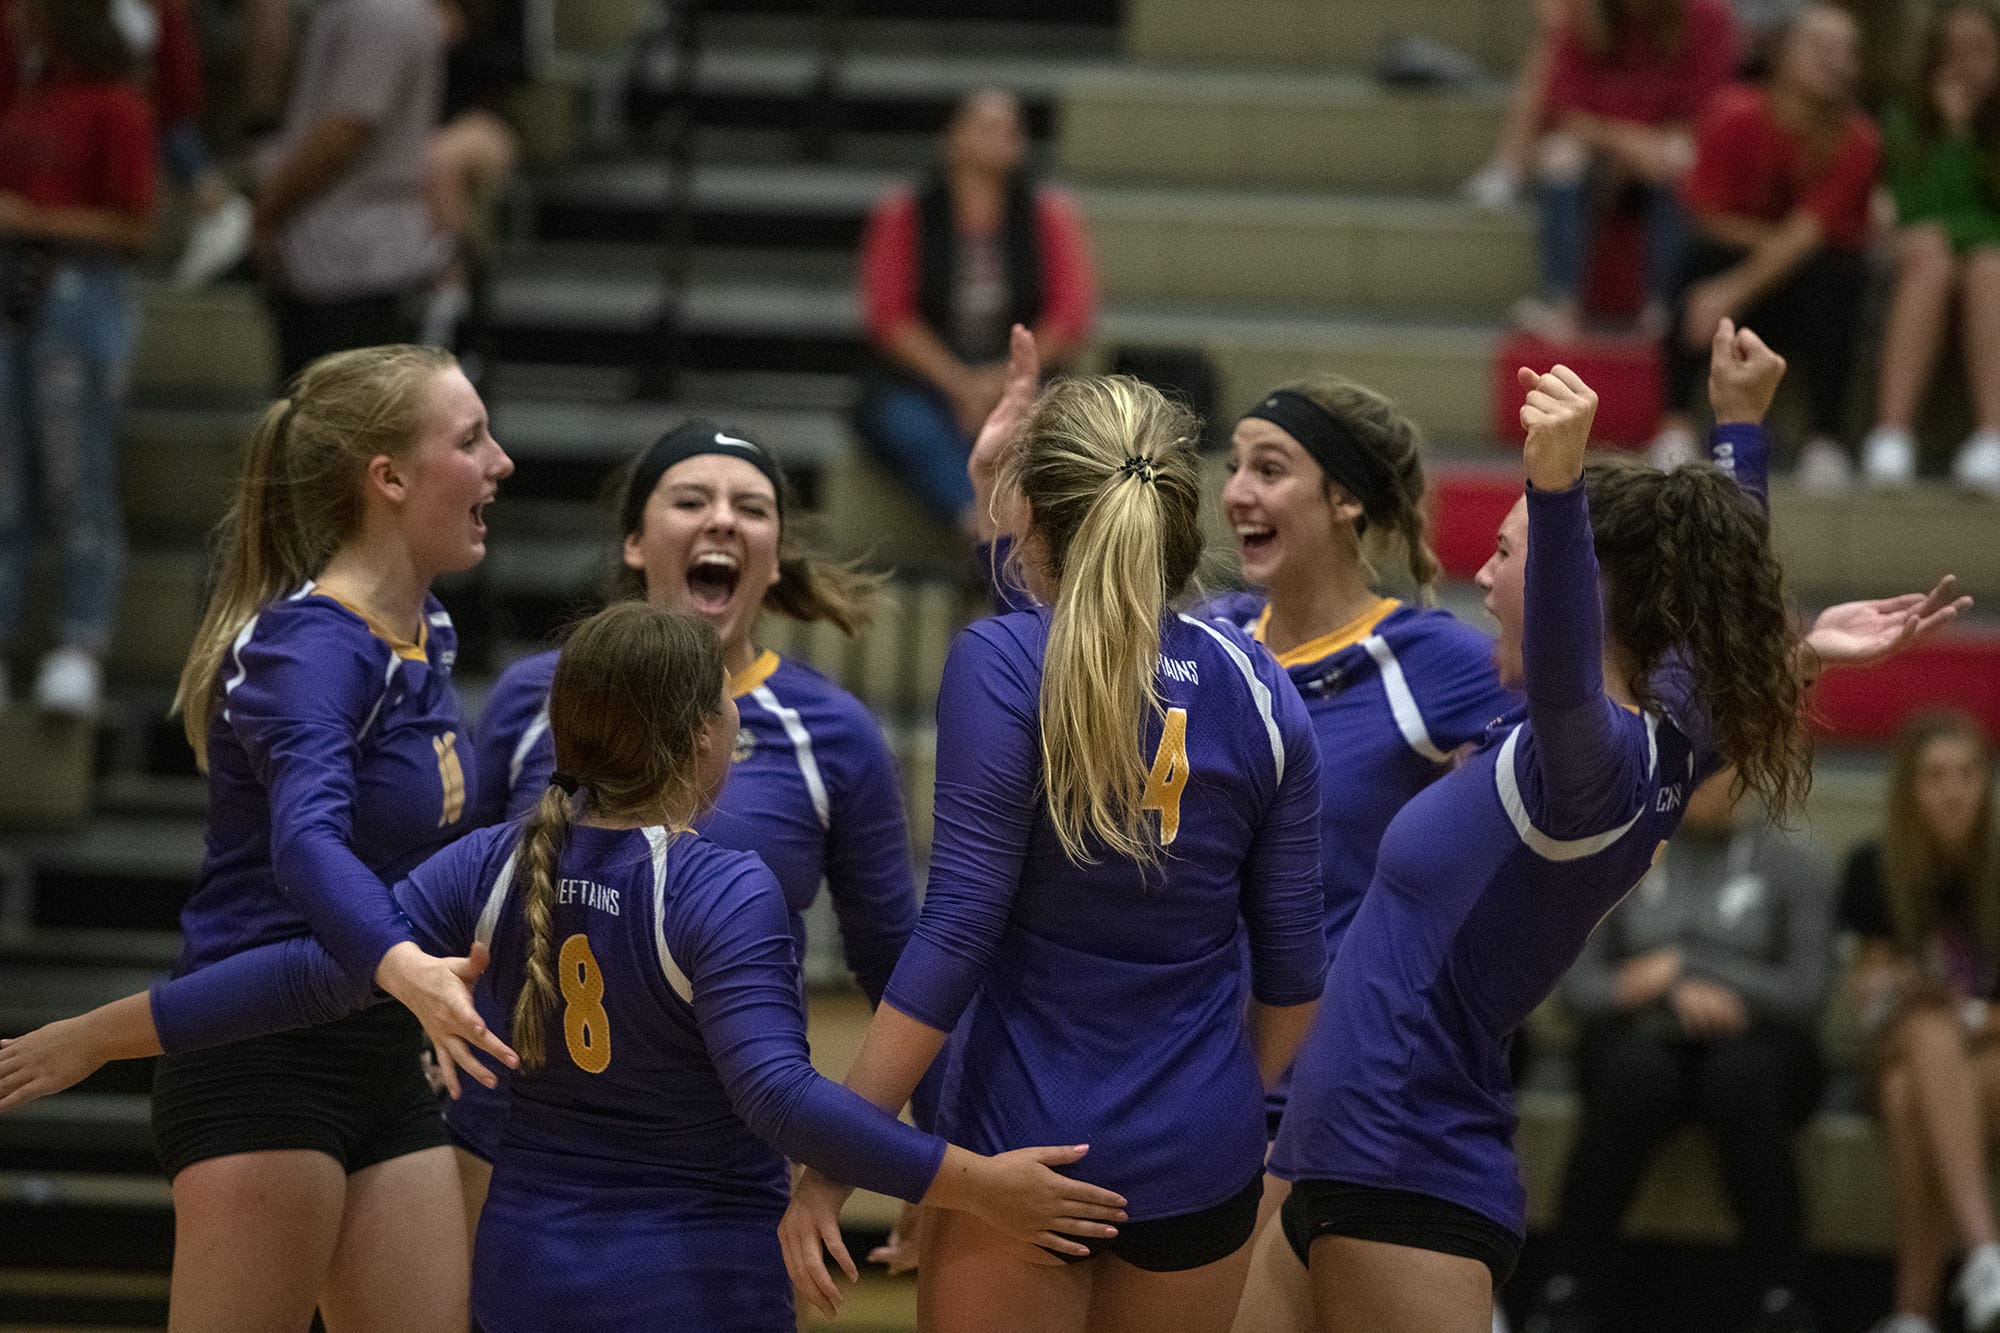 The Columbia River Chieftains celebrate a match point against the Camas Papermakers at Camas High School on Tuesday evening, September 10, 2019.